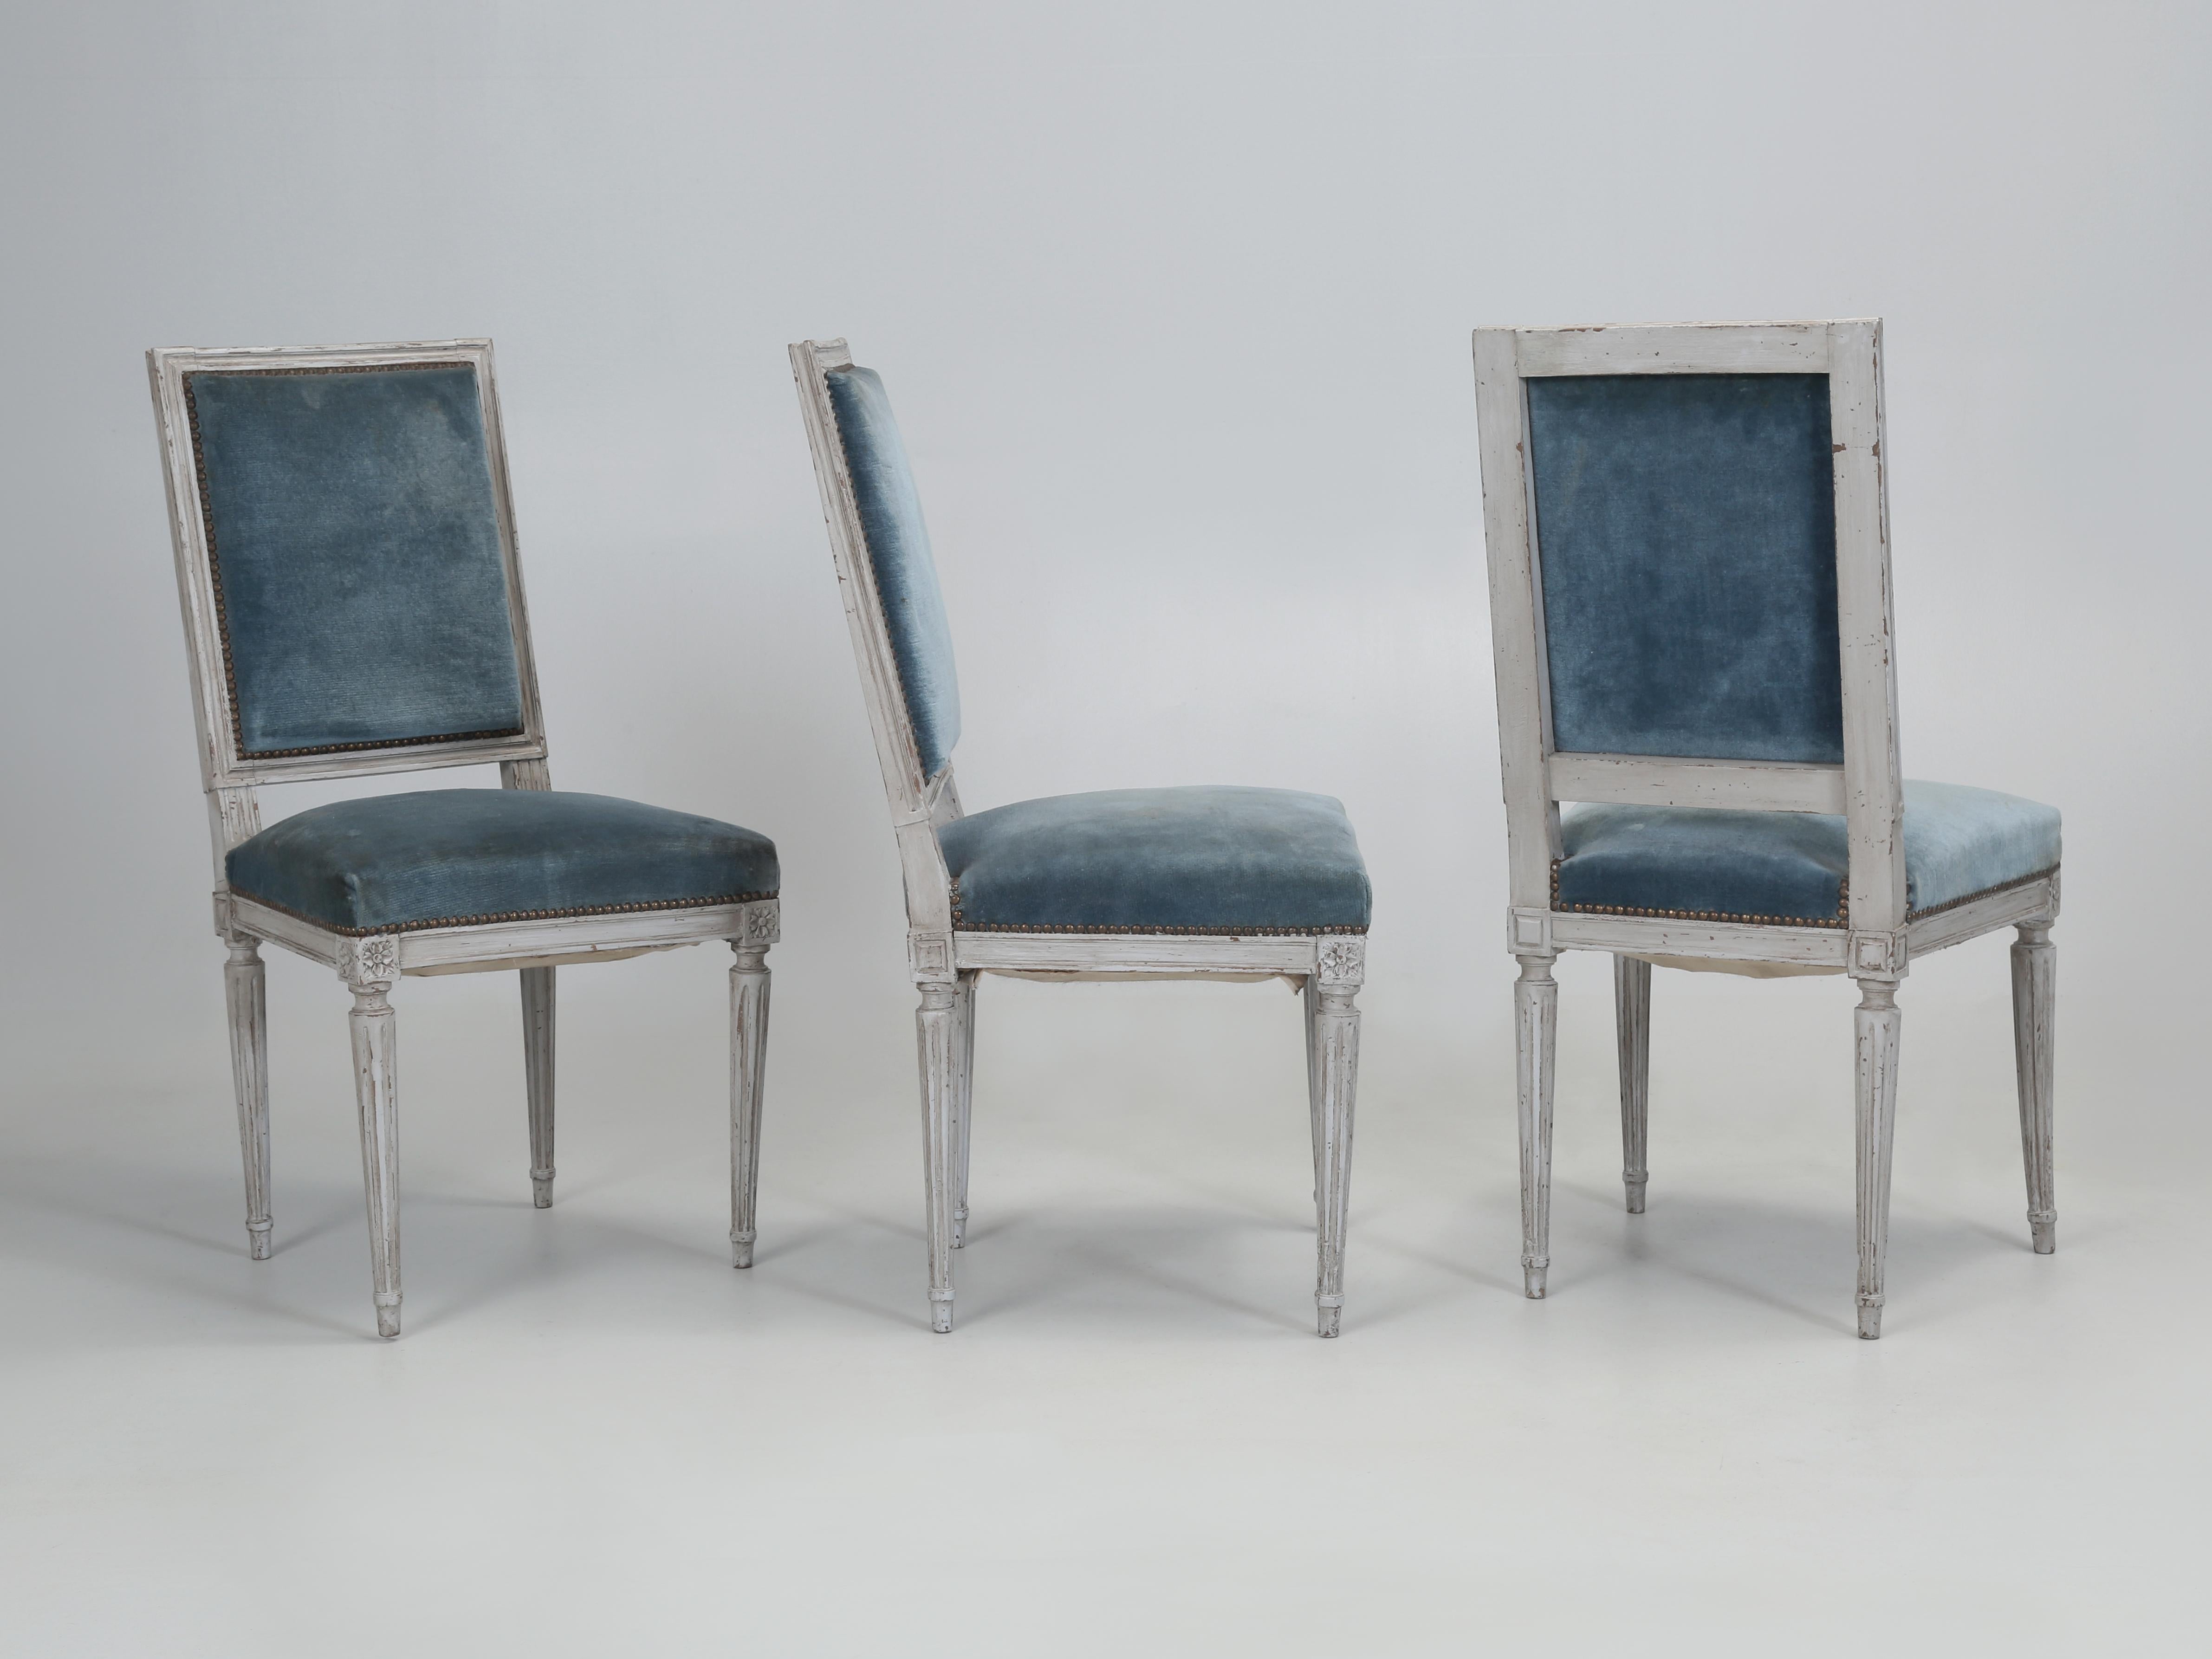 Antique set of (10) French Louis XVI Dining Chairs in desperate need of restoration. Whoever purchases this unusually large set of (10) Antique Louis XVI Dining Chairs will need to send them to a competent upholstery shop who also knows how to